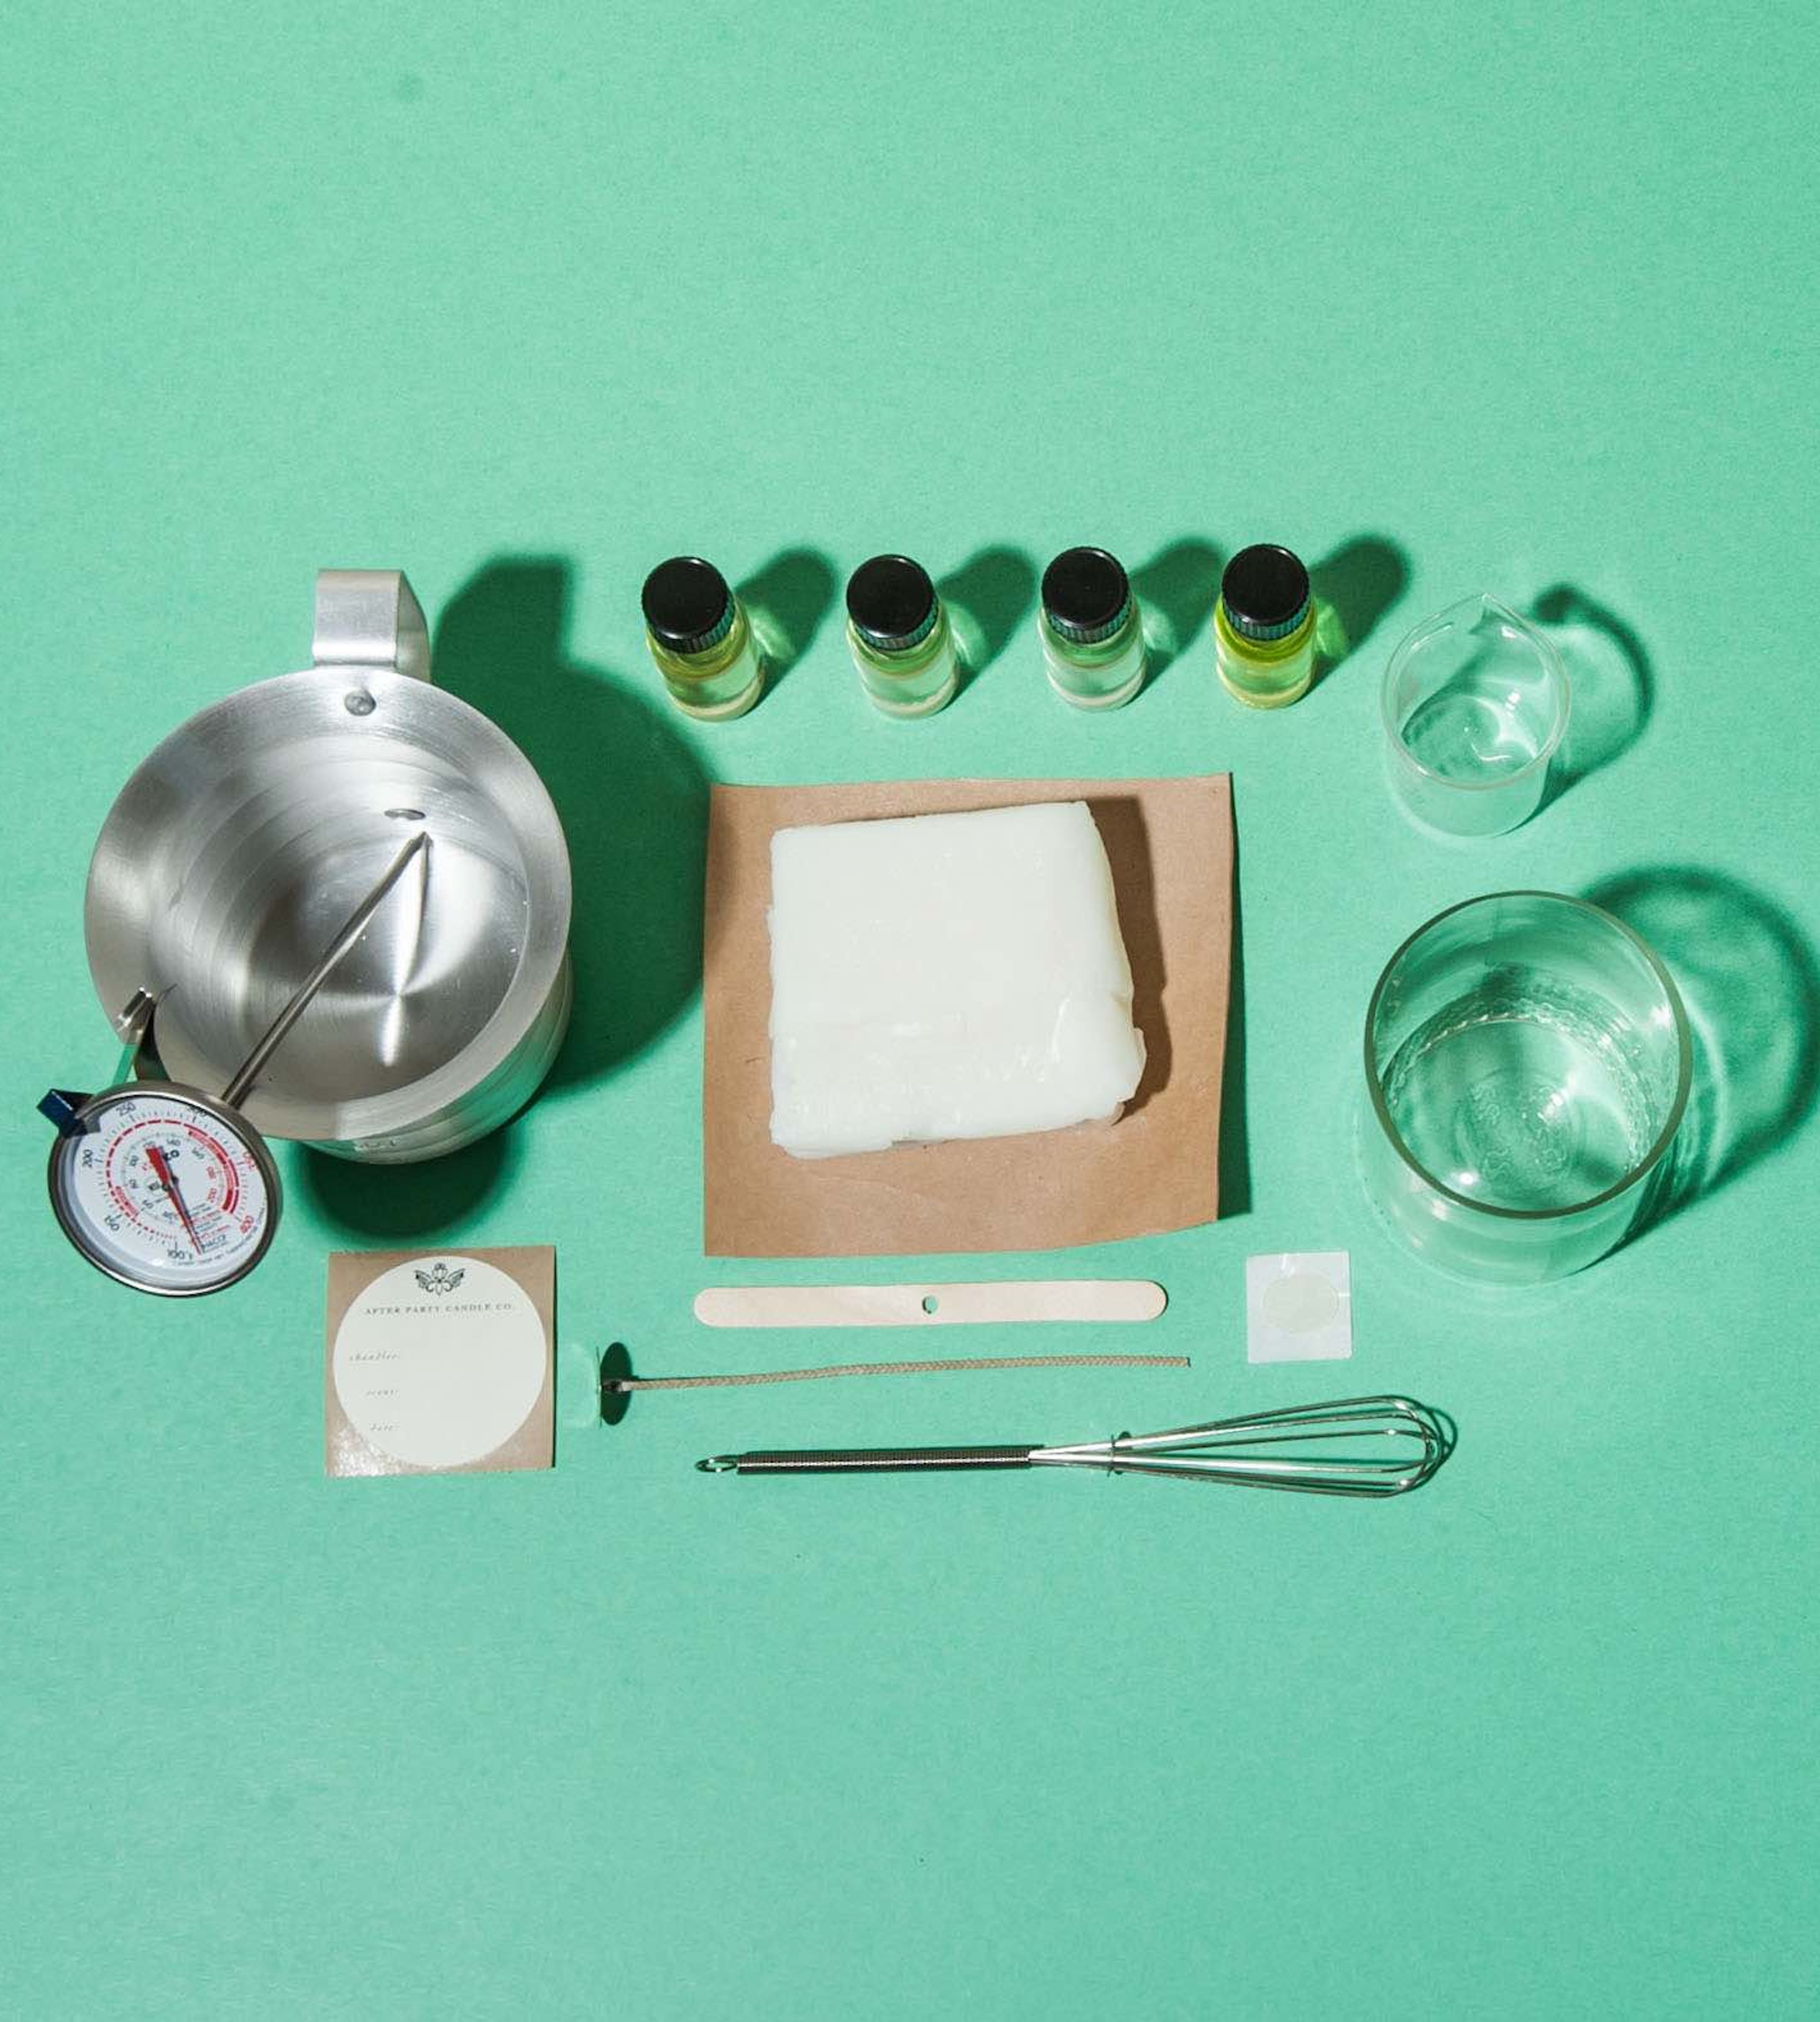 Beginner-Friendly Craft Kits to Gift the DIYers in Your Life